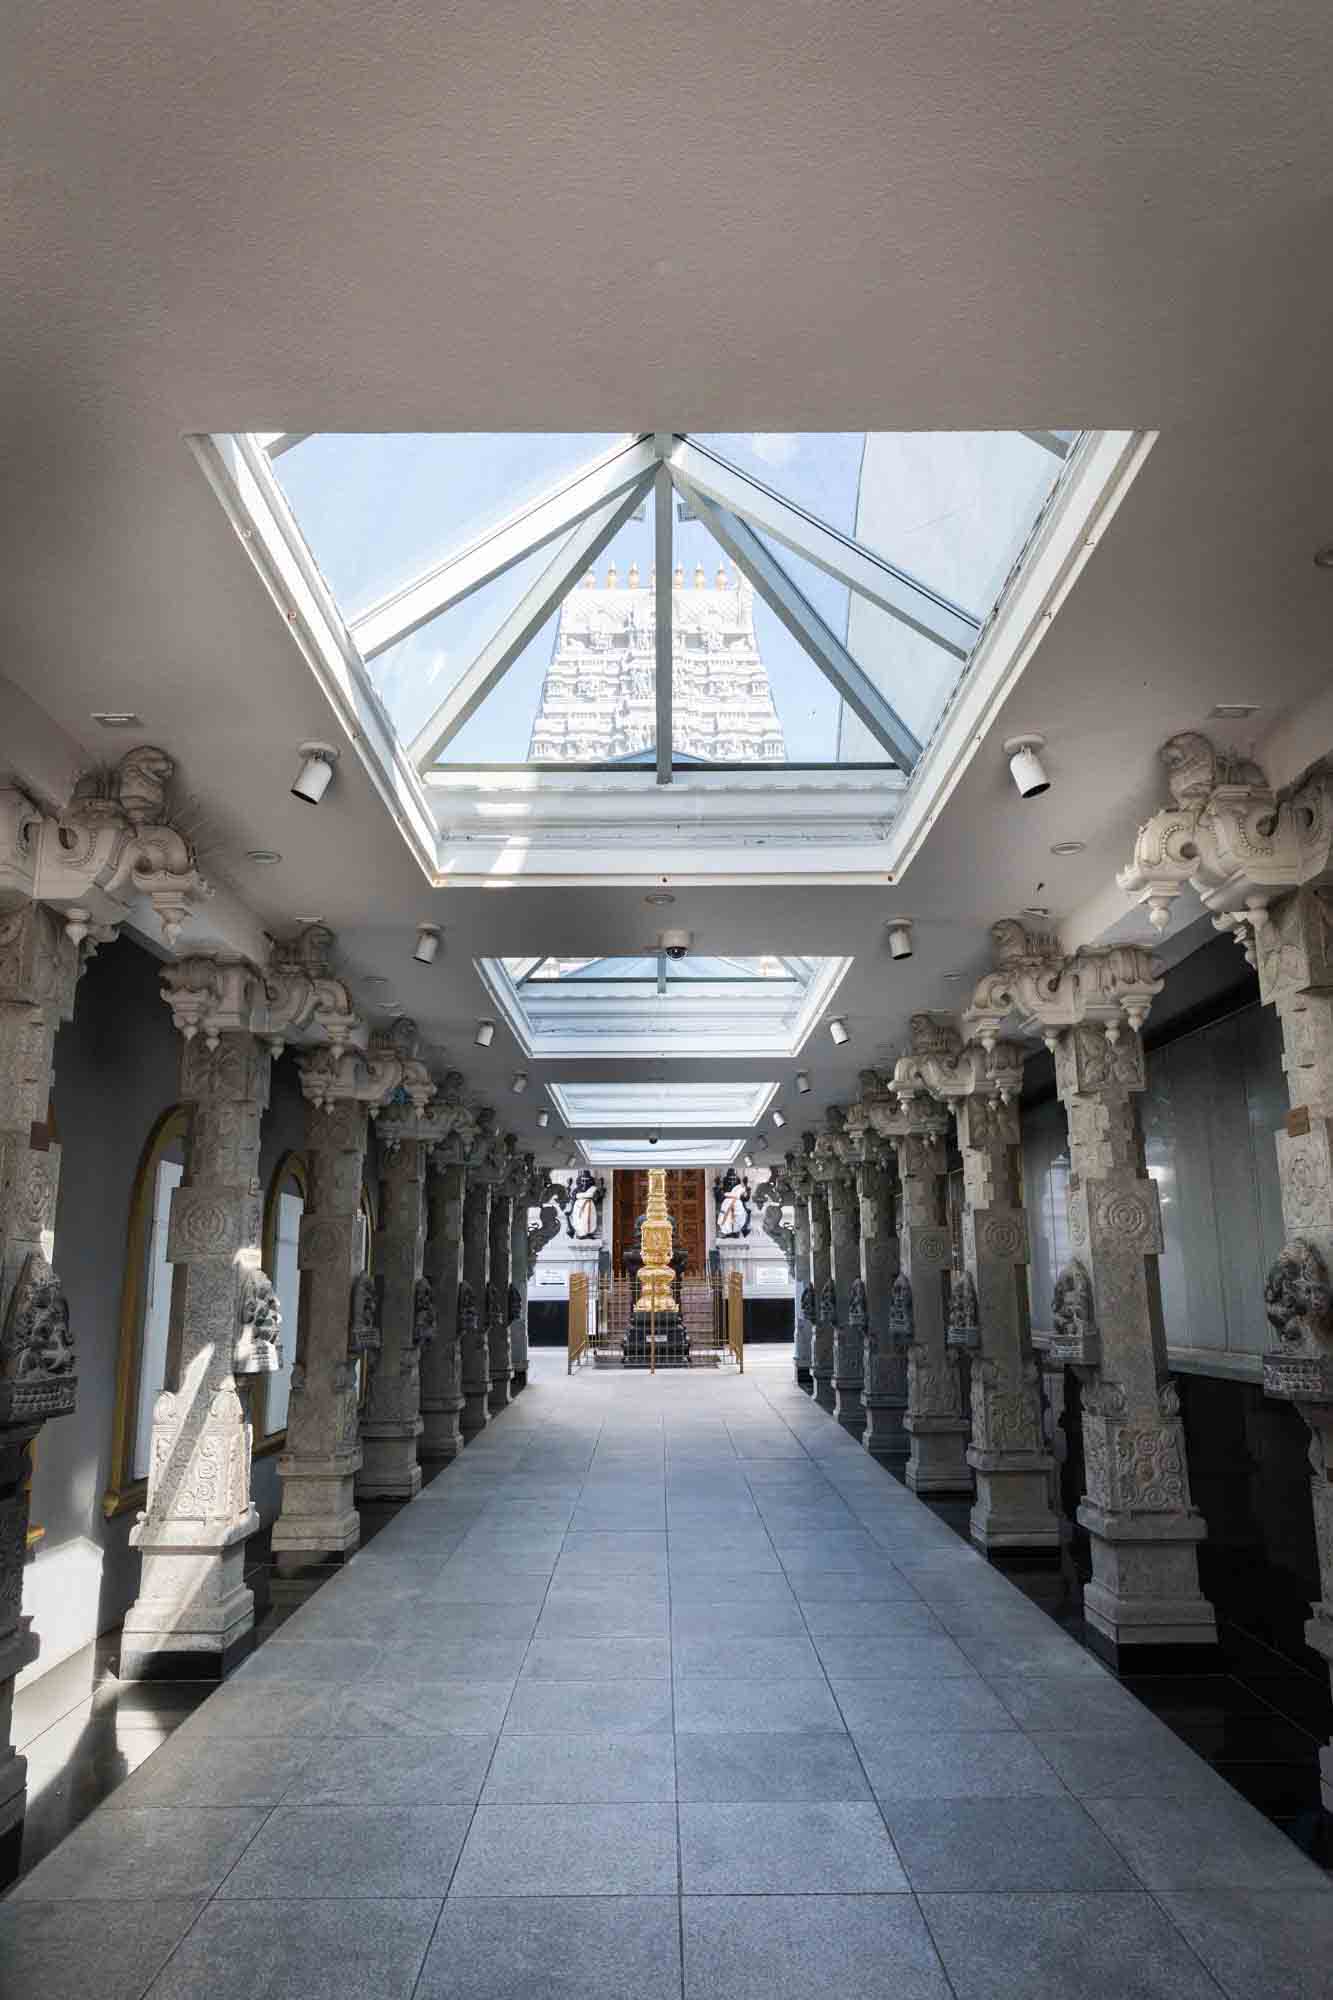 Main entrance to the Hindu Temple Society of North America with skylight and statues